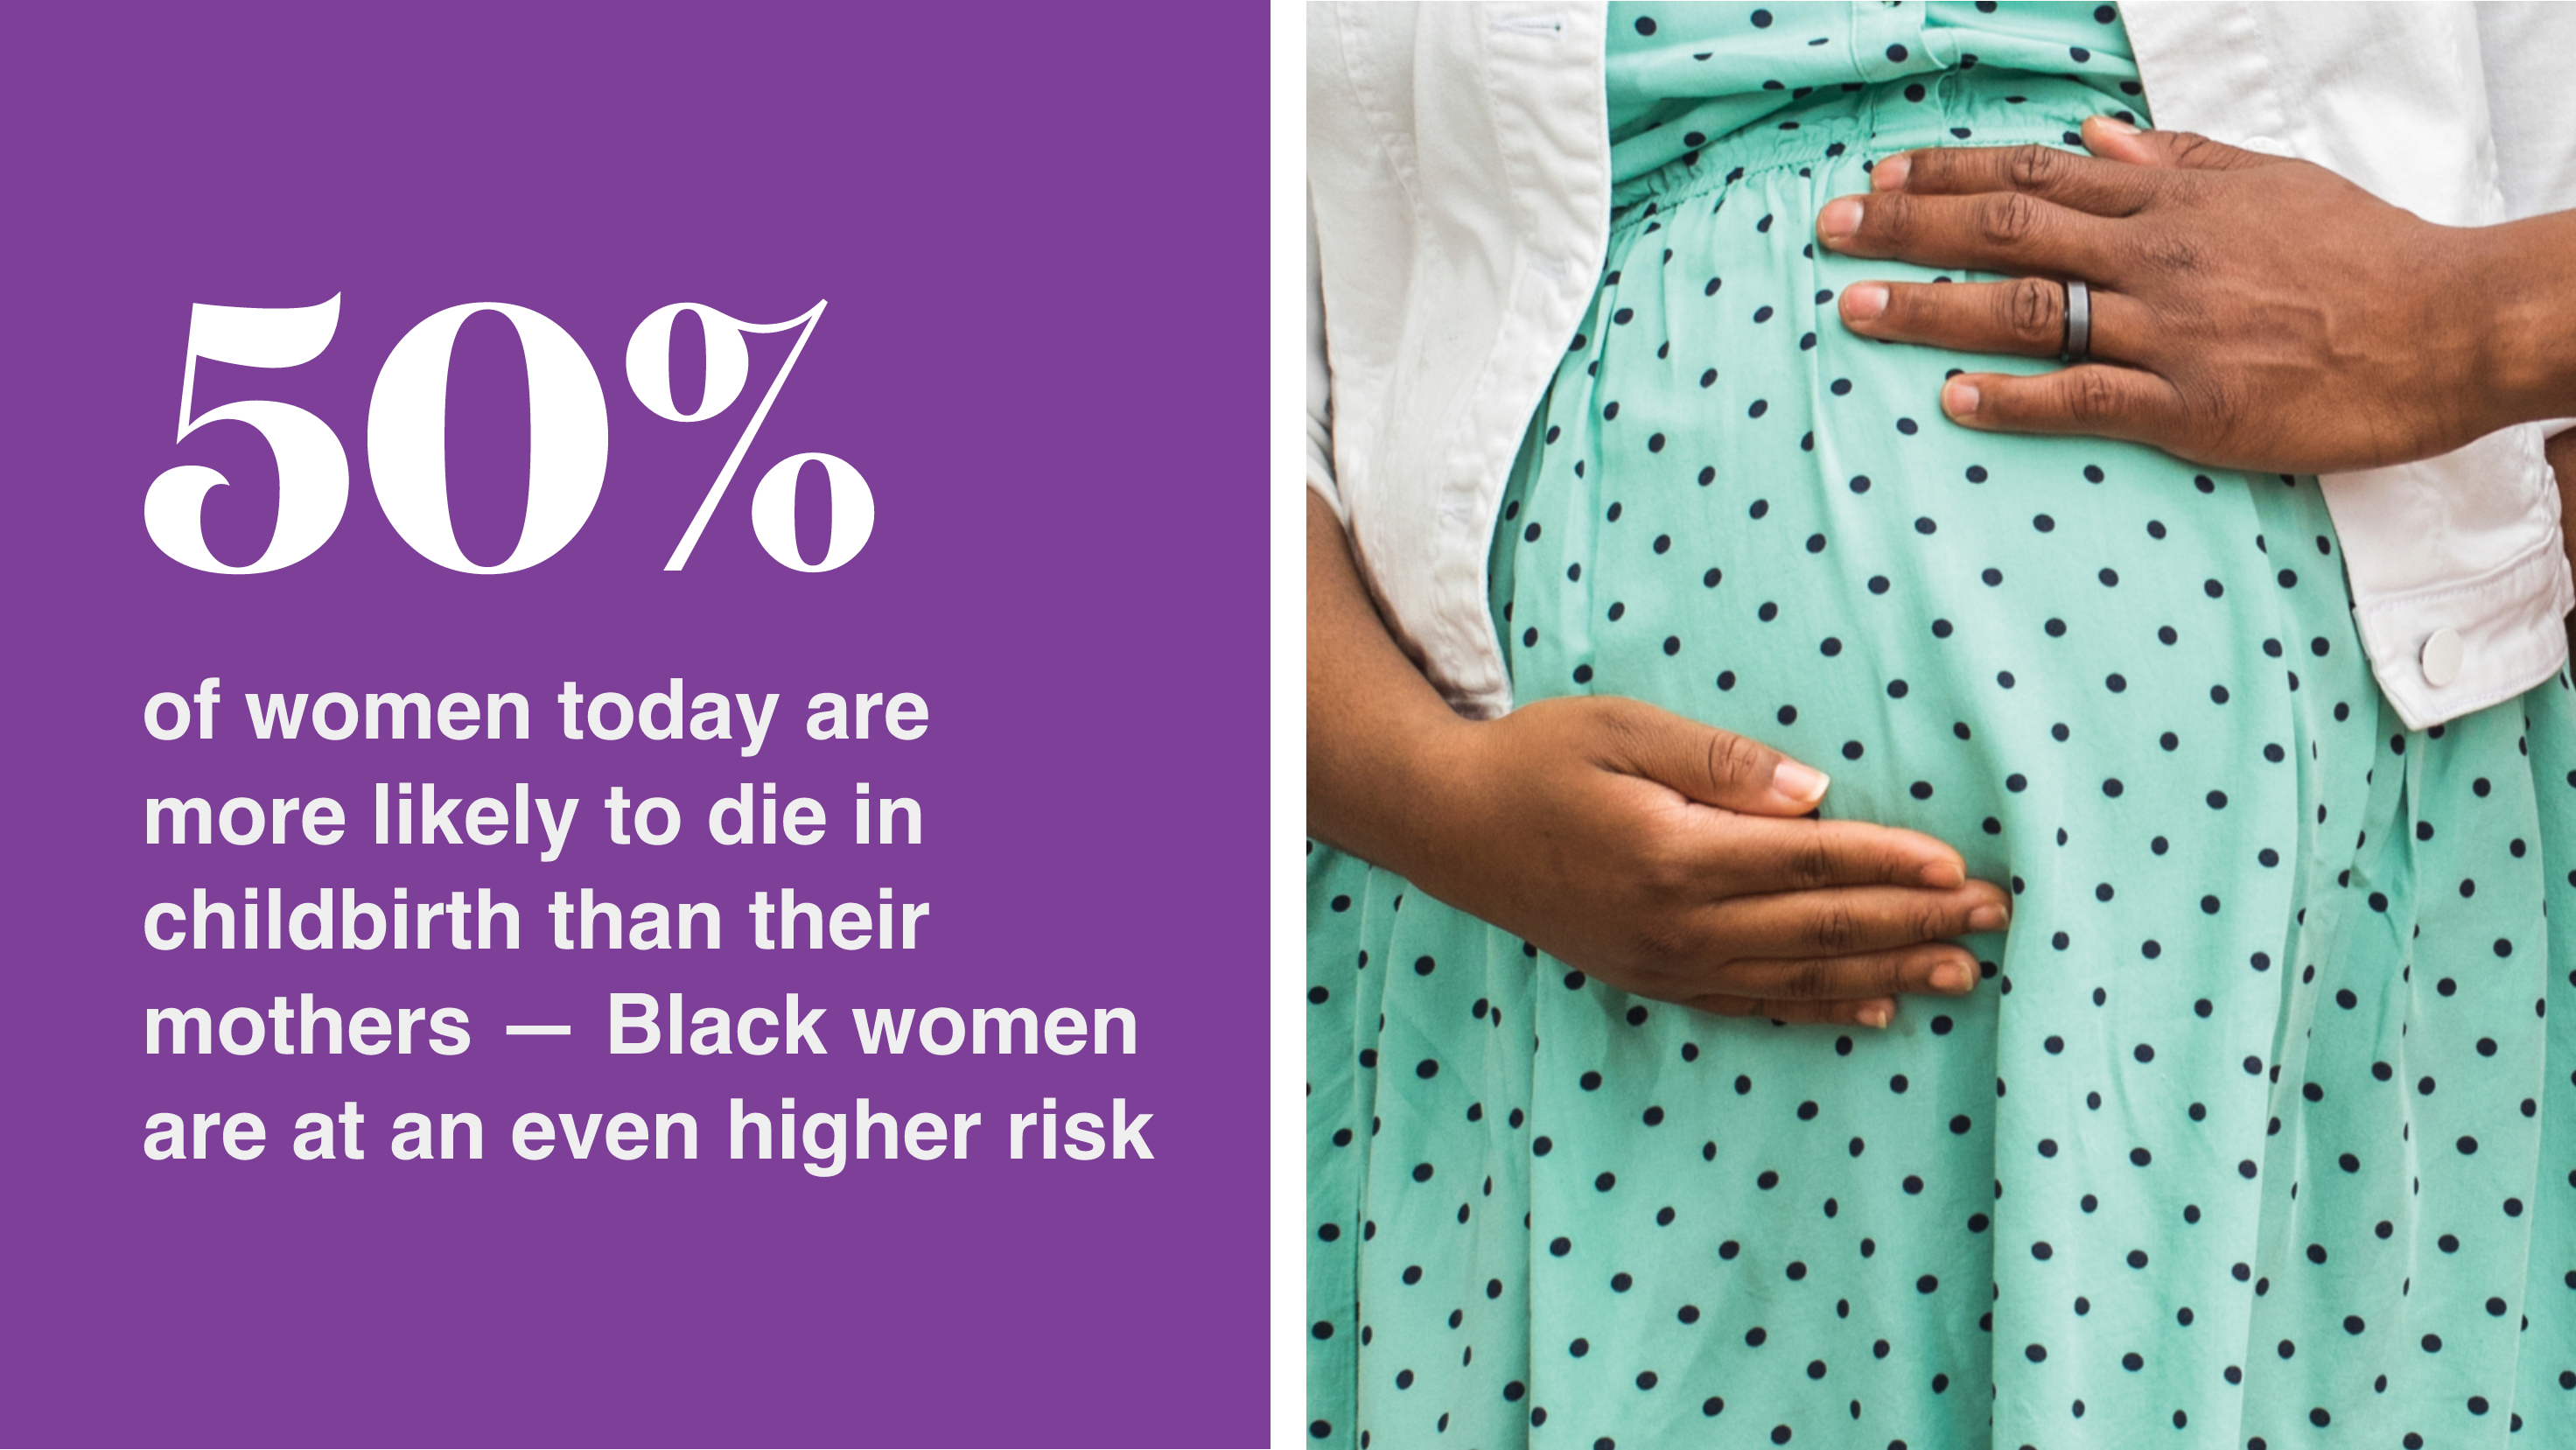 50% of women today are more likely to die in childbirth than their mothers — Black women are at an even higher risk